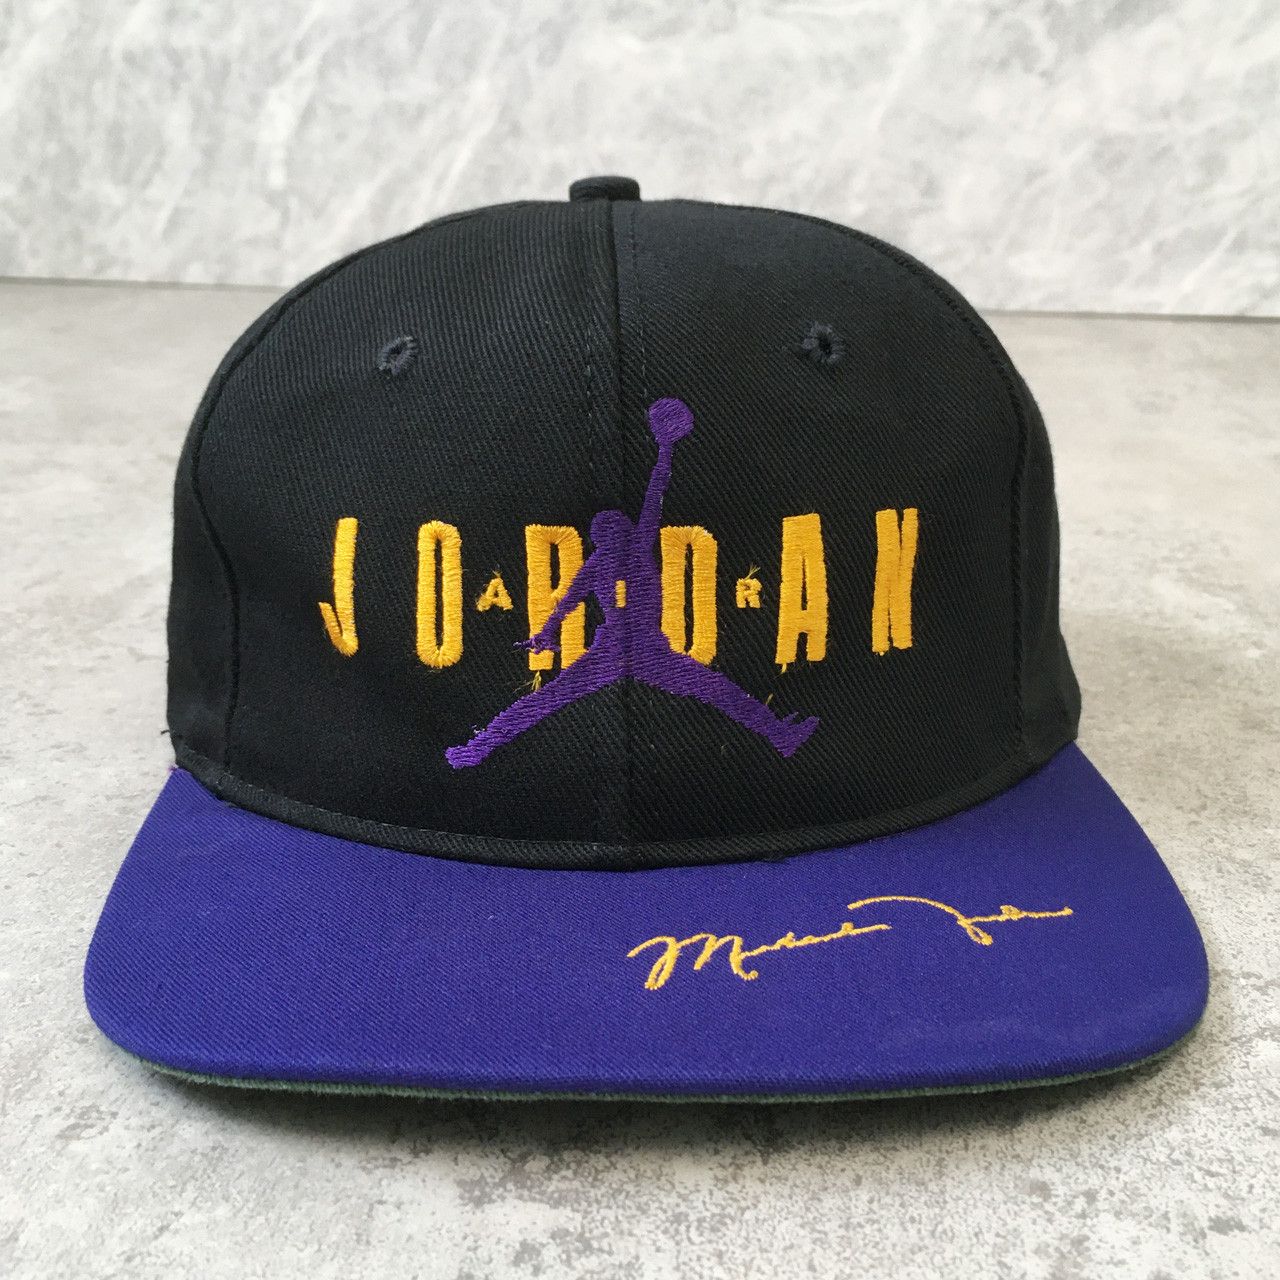 Nike VTG 90S Nike Jordan SNAPBACK HAT MADE IN USA PURPLE YELLOW Size ONE SIZE - 1 Preview